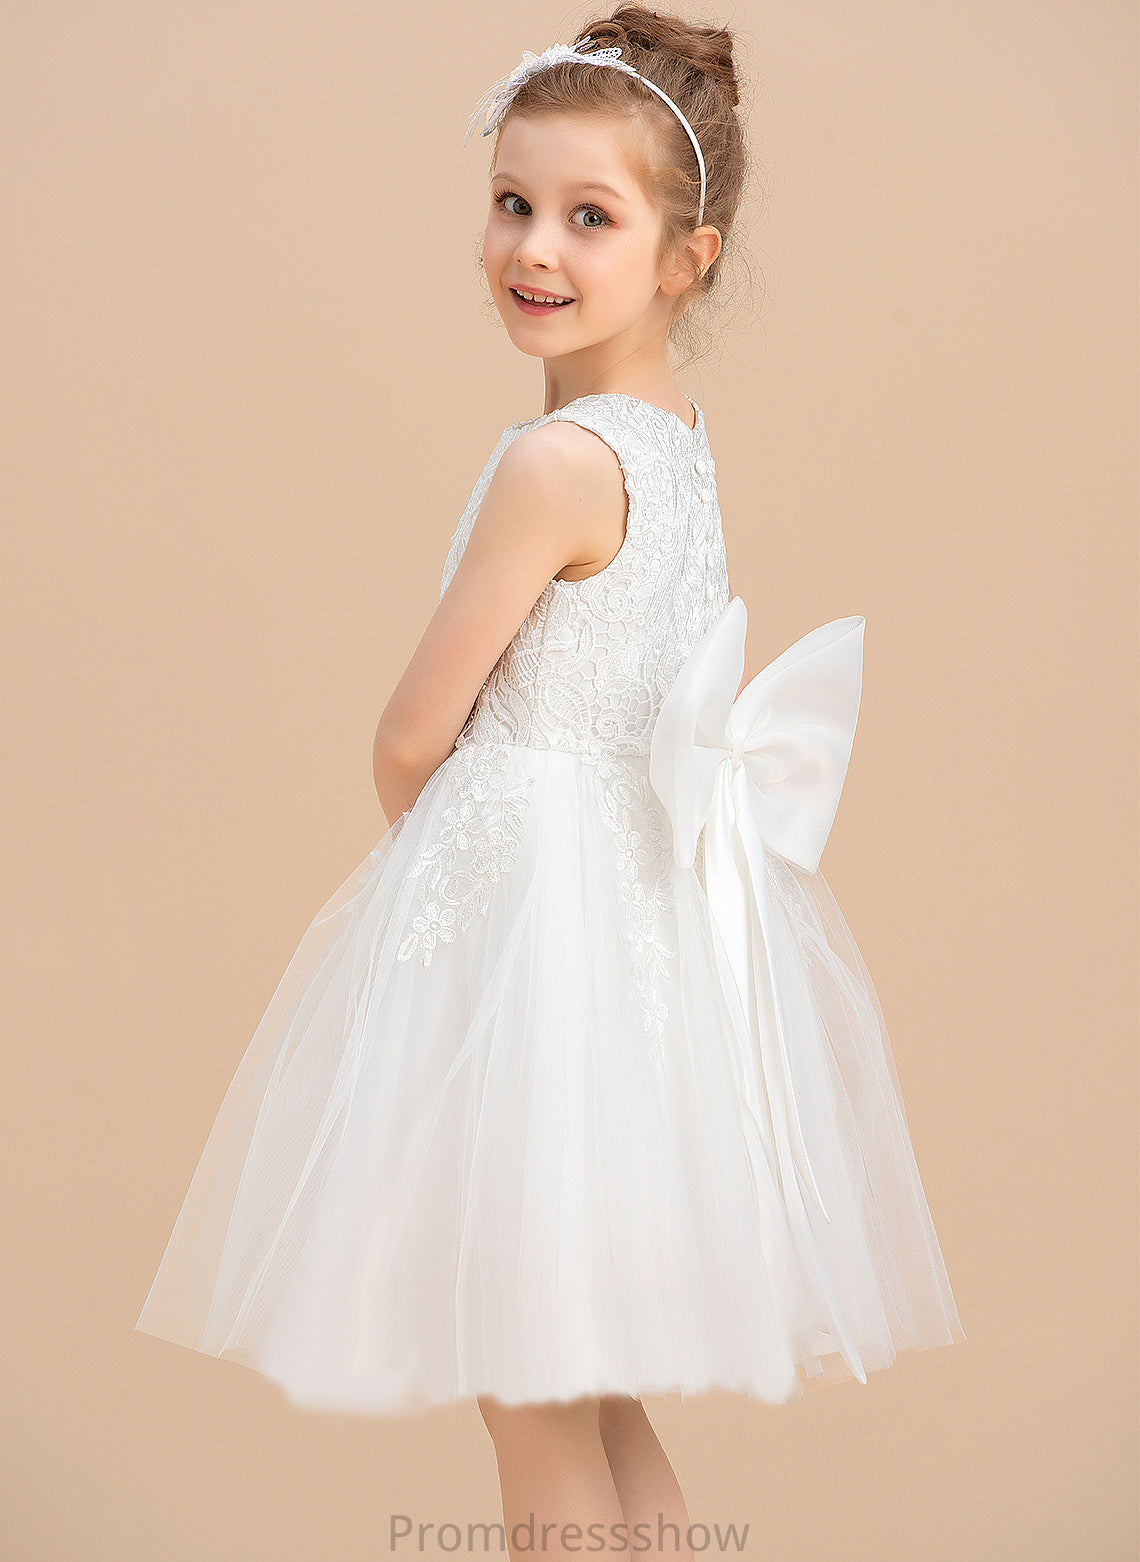 Lace/Bow(s) - Flower Girl Neck Sarah With Dress Sleeveless Tulle/Lace Flower Girl Dresses Scoop Knee-length A-Line